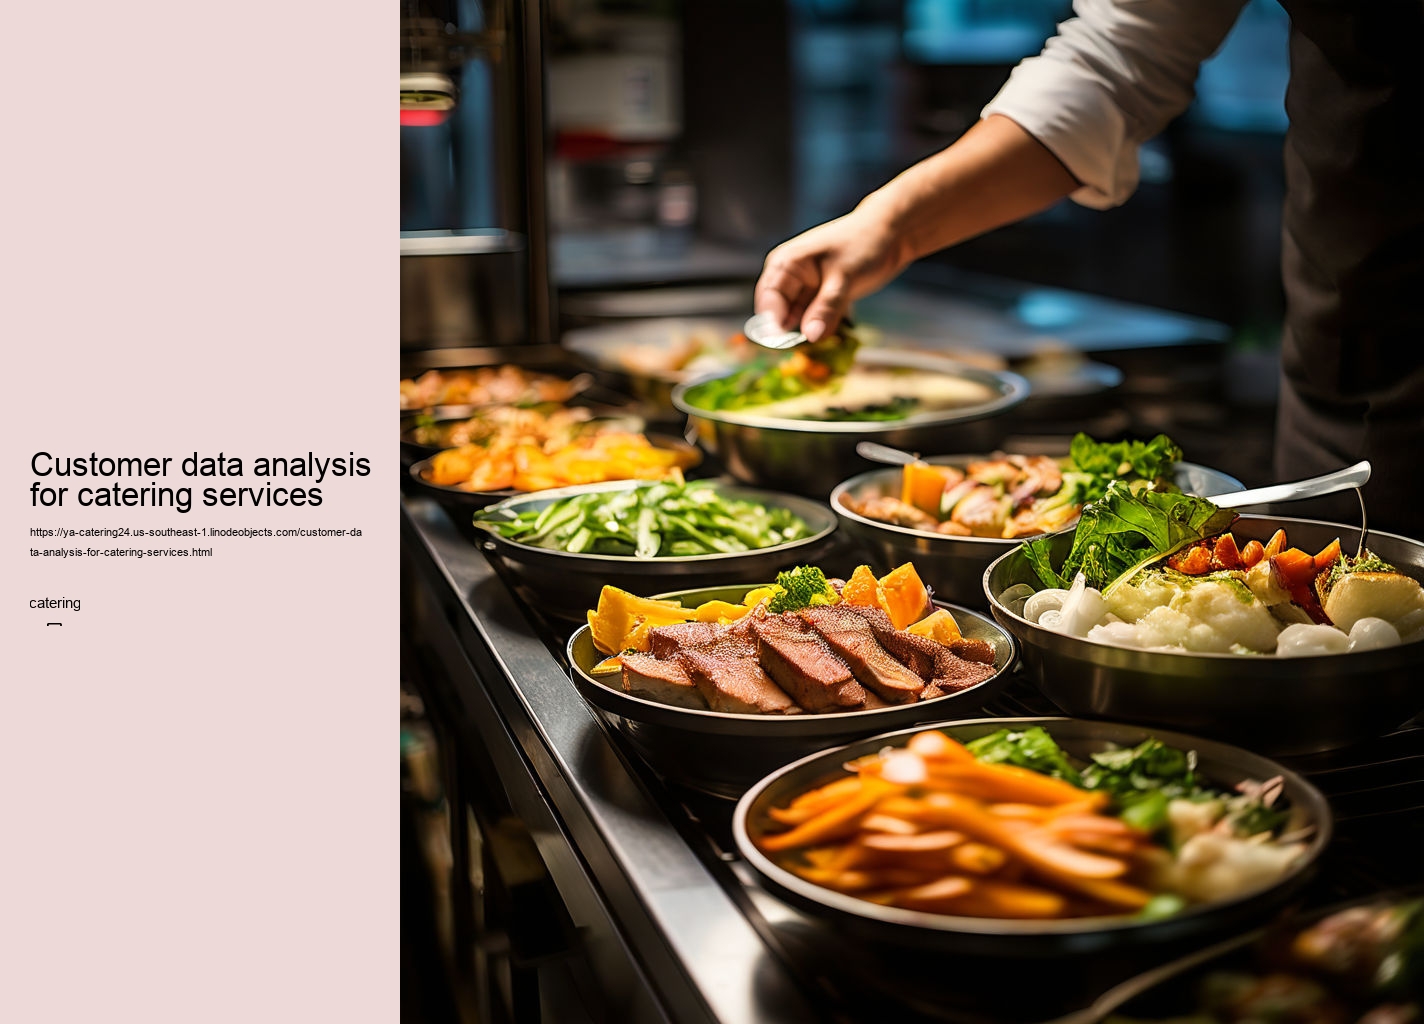 Customer data analysis for catering services